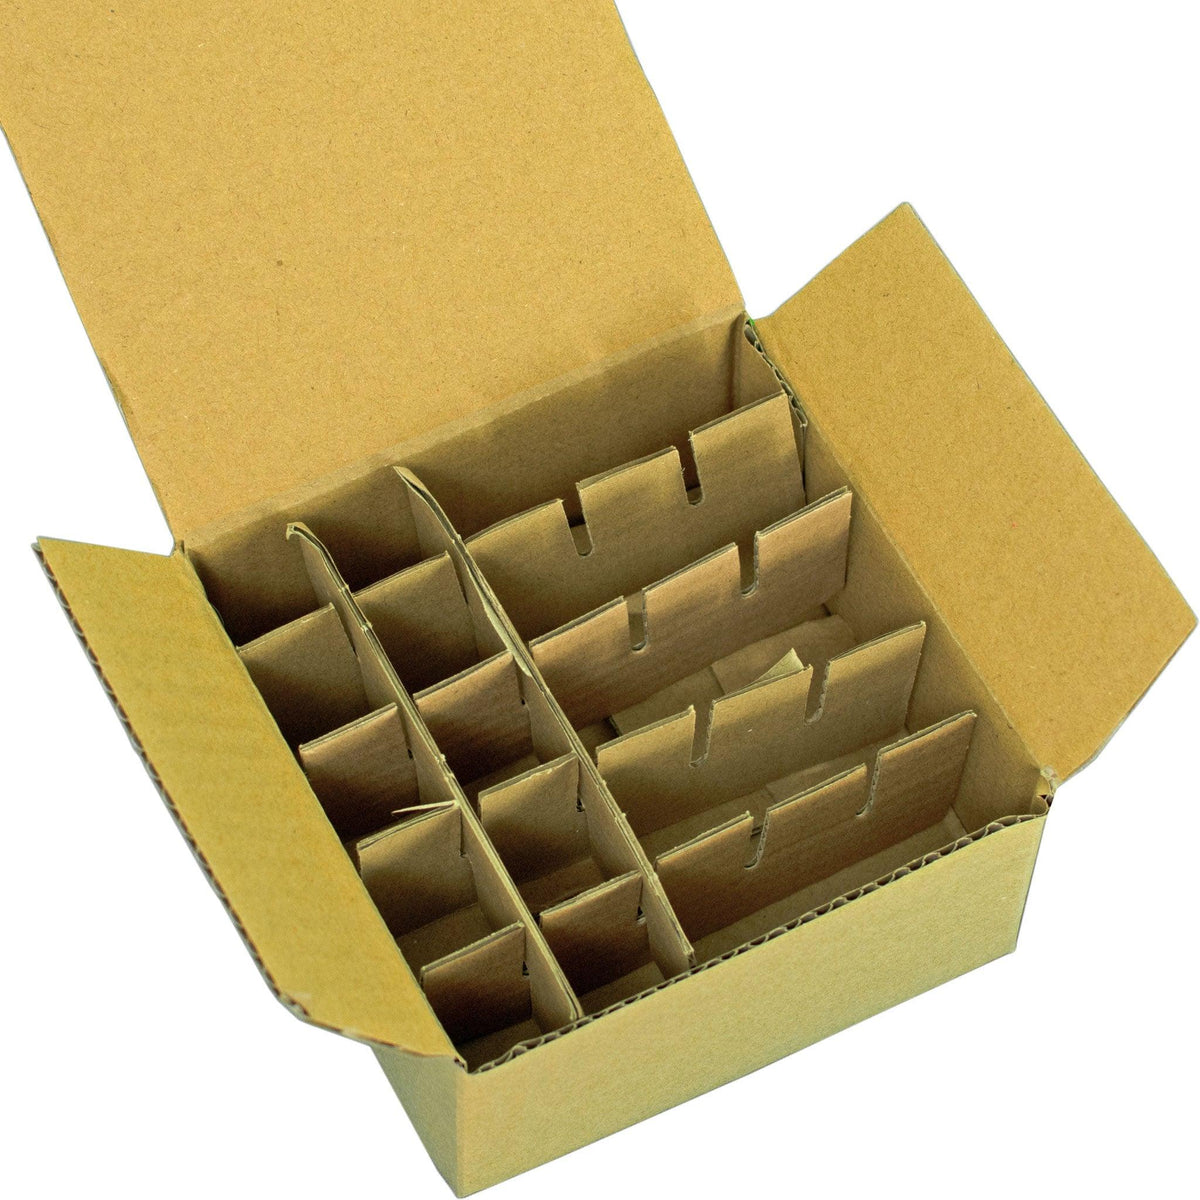 Purchase New Cardboard Boxes for C-9 Light Bulbs Sold by Lee Display